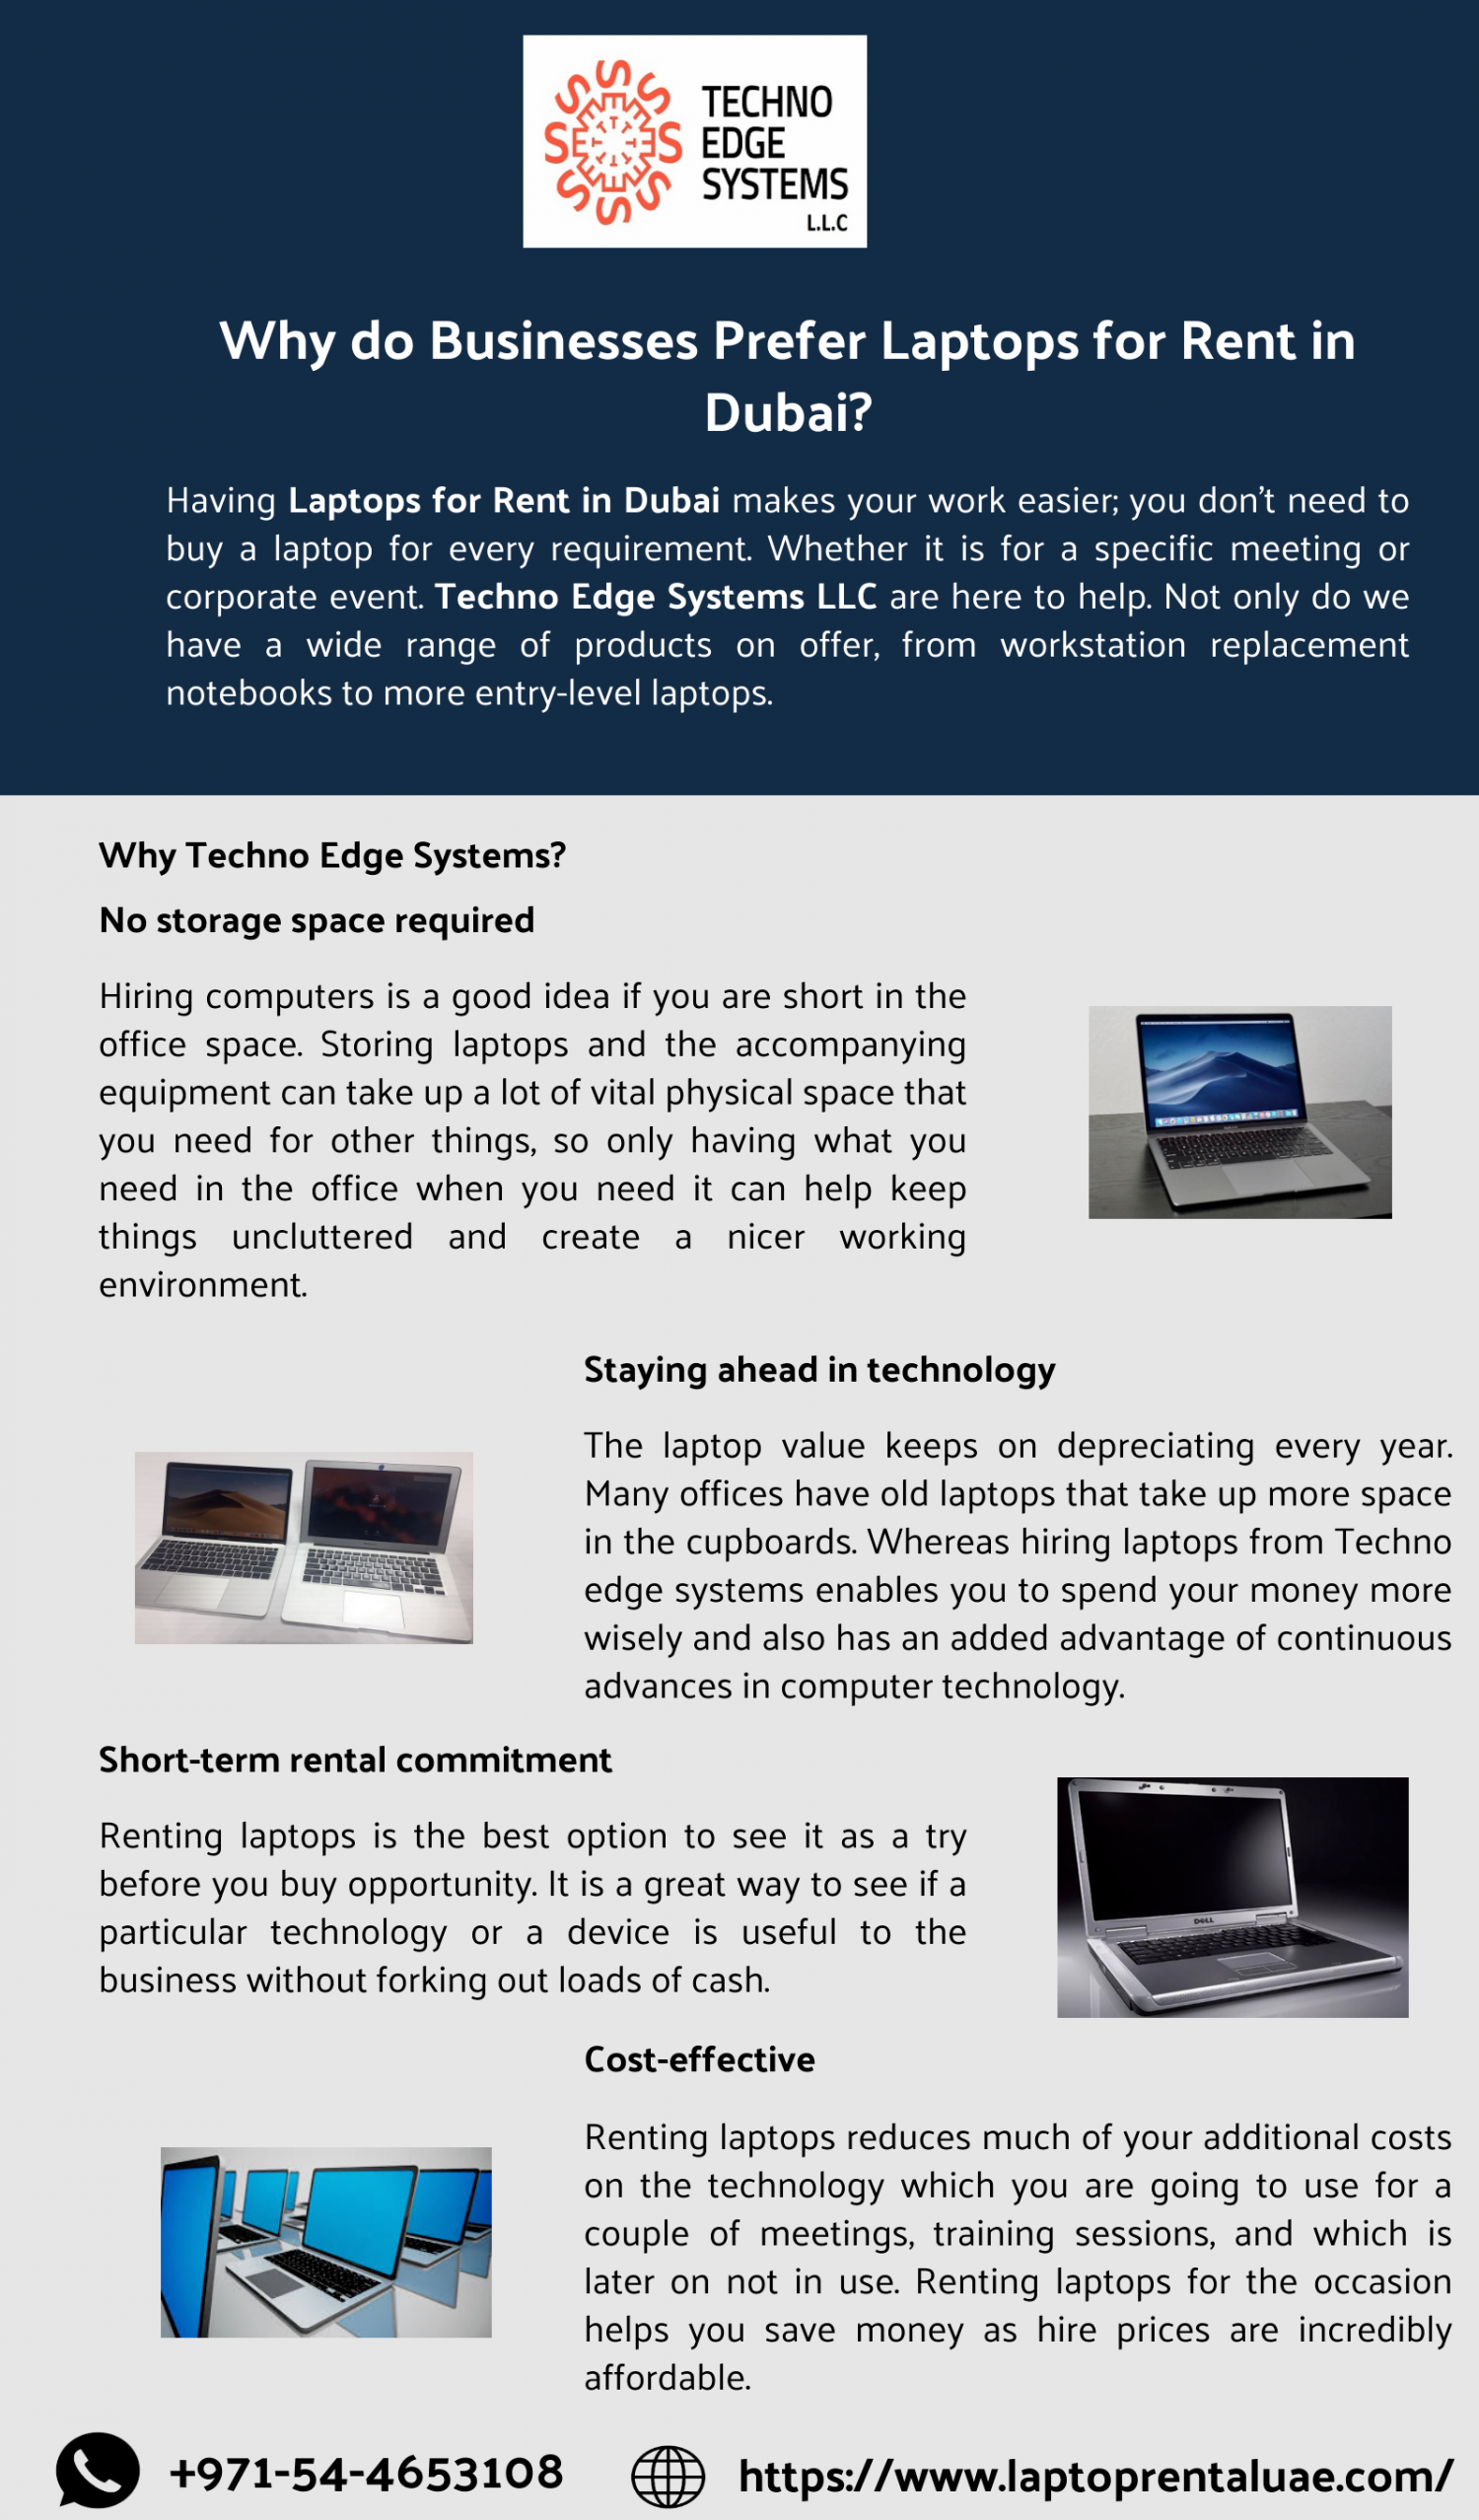 Why do Businesses Prefer Laptops for Rent in Dubai? Infographic